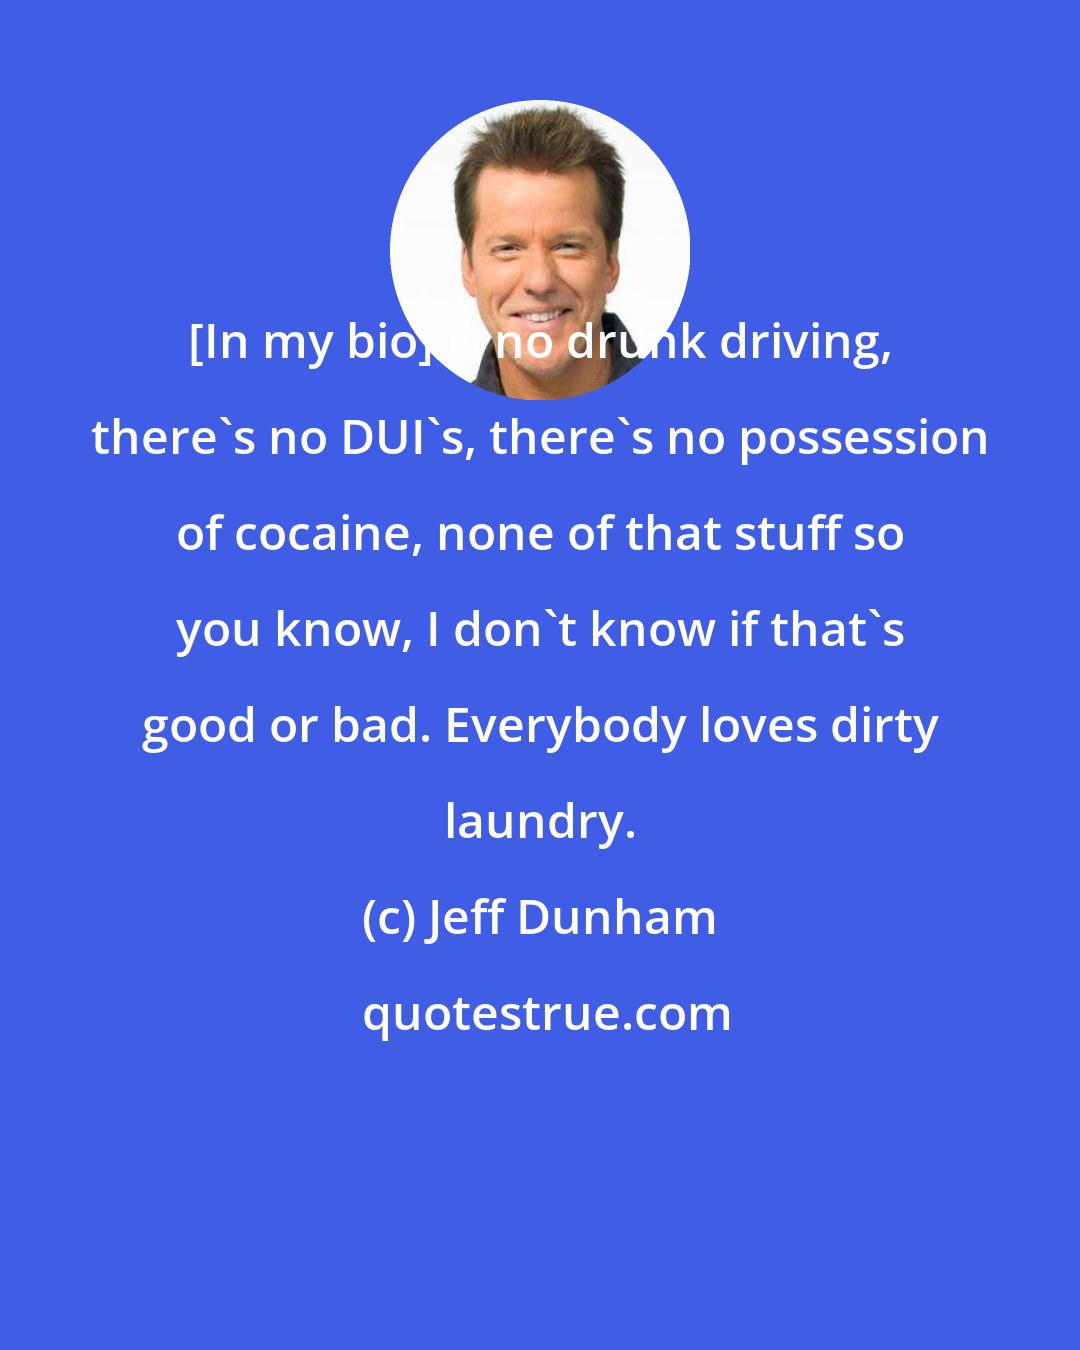 Jeff Dunham: [In my bio] is no drunk driving, there's no DUI's, there's no possession of cocaine, none of that stuff so you know, I don't know if that's good or bad. Everybody loves dirty laundry.